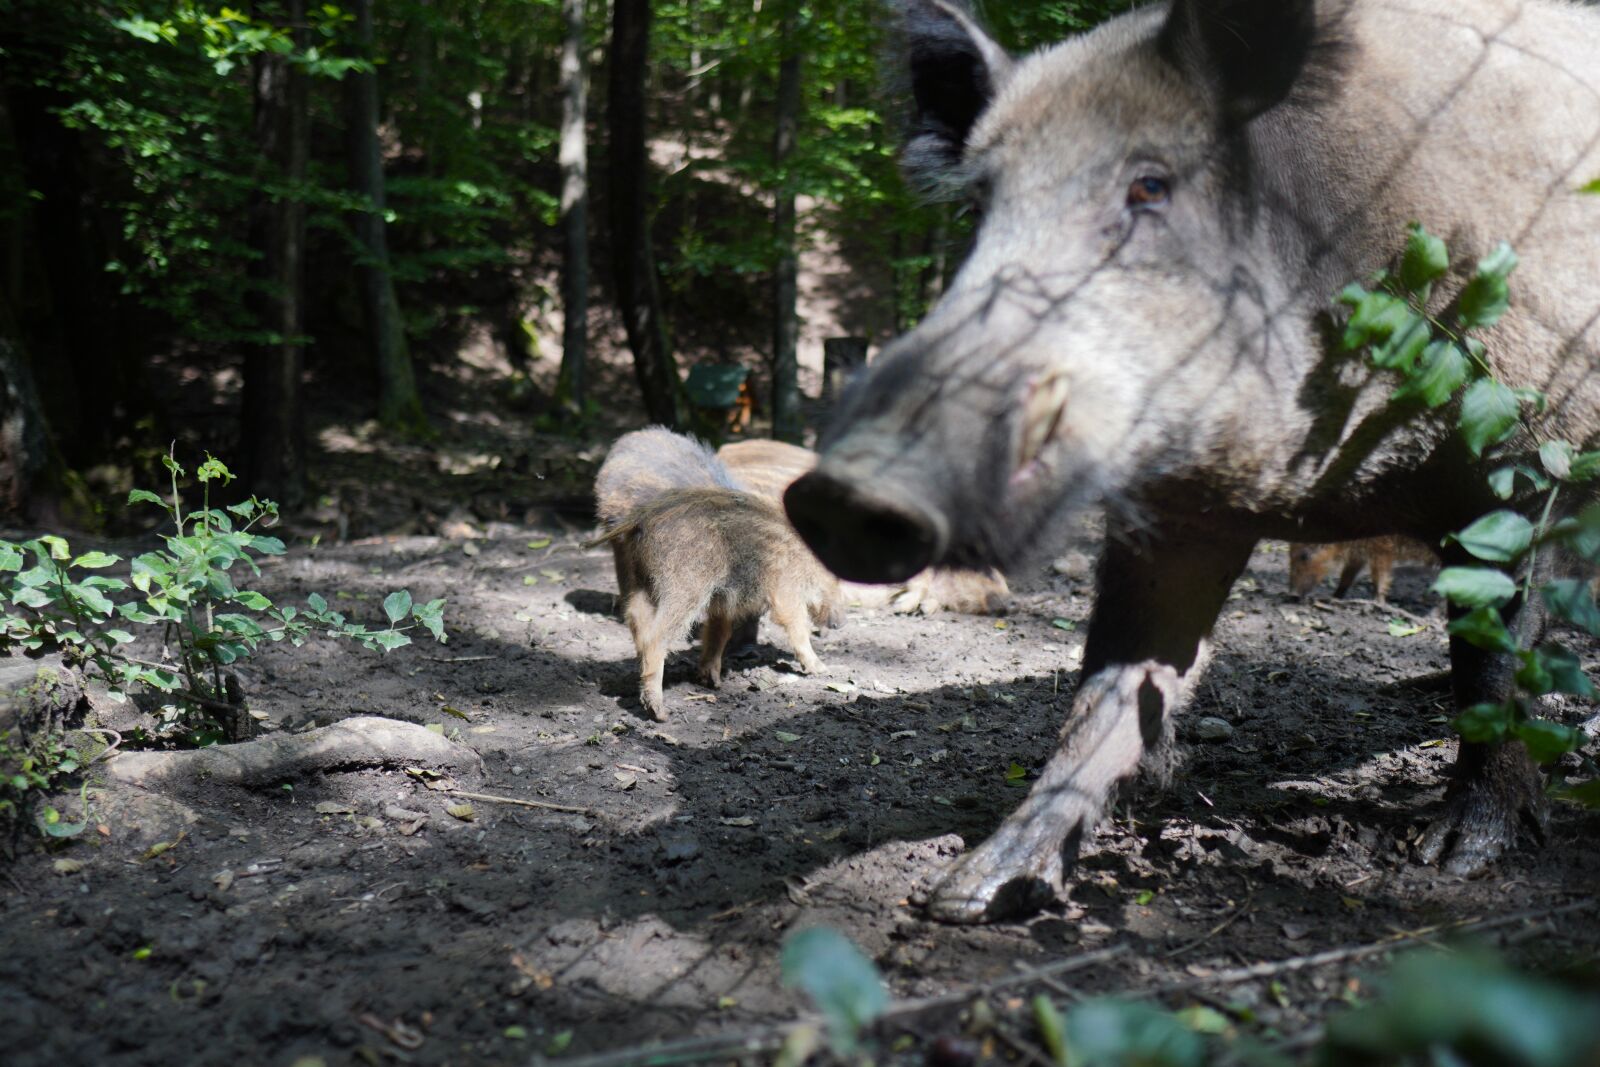 Sony a6400 sample photo. Wild boar, nature, pig photography